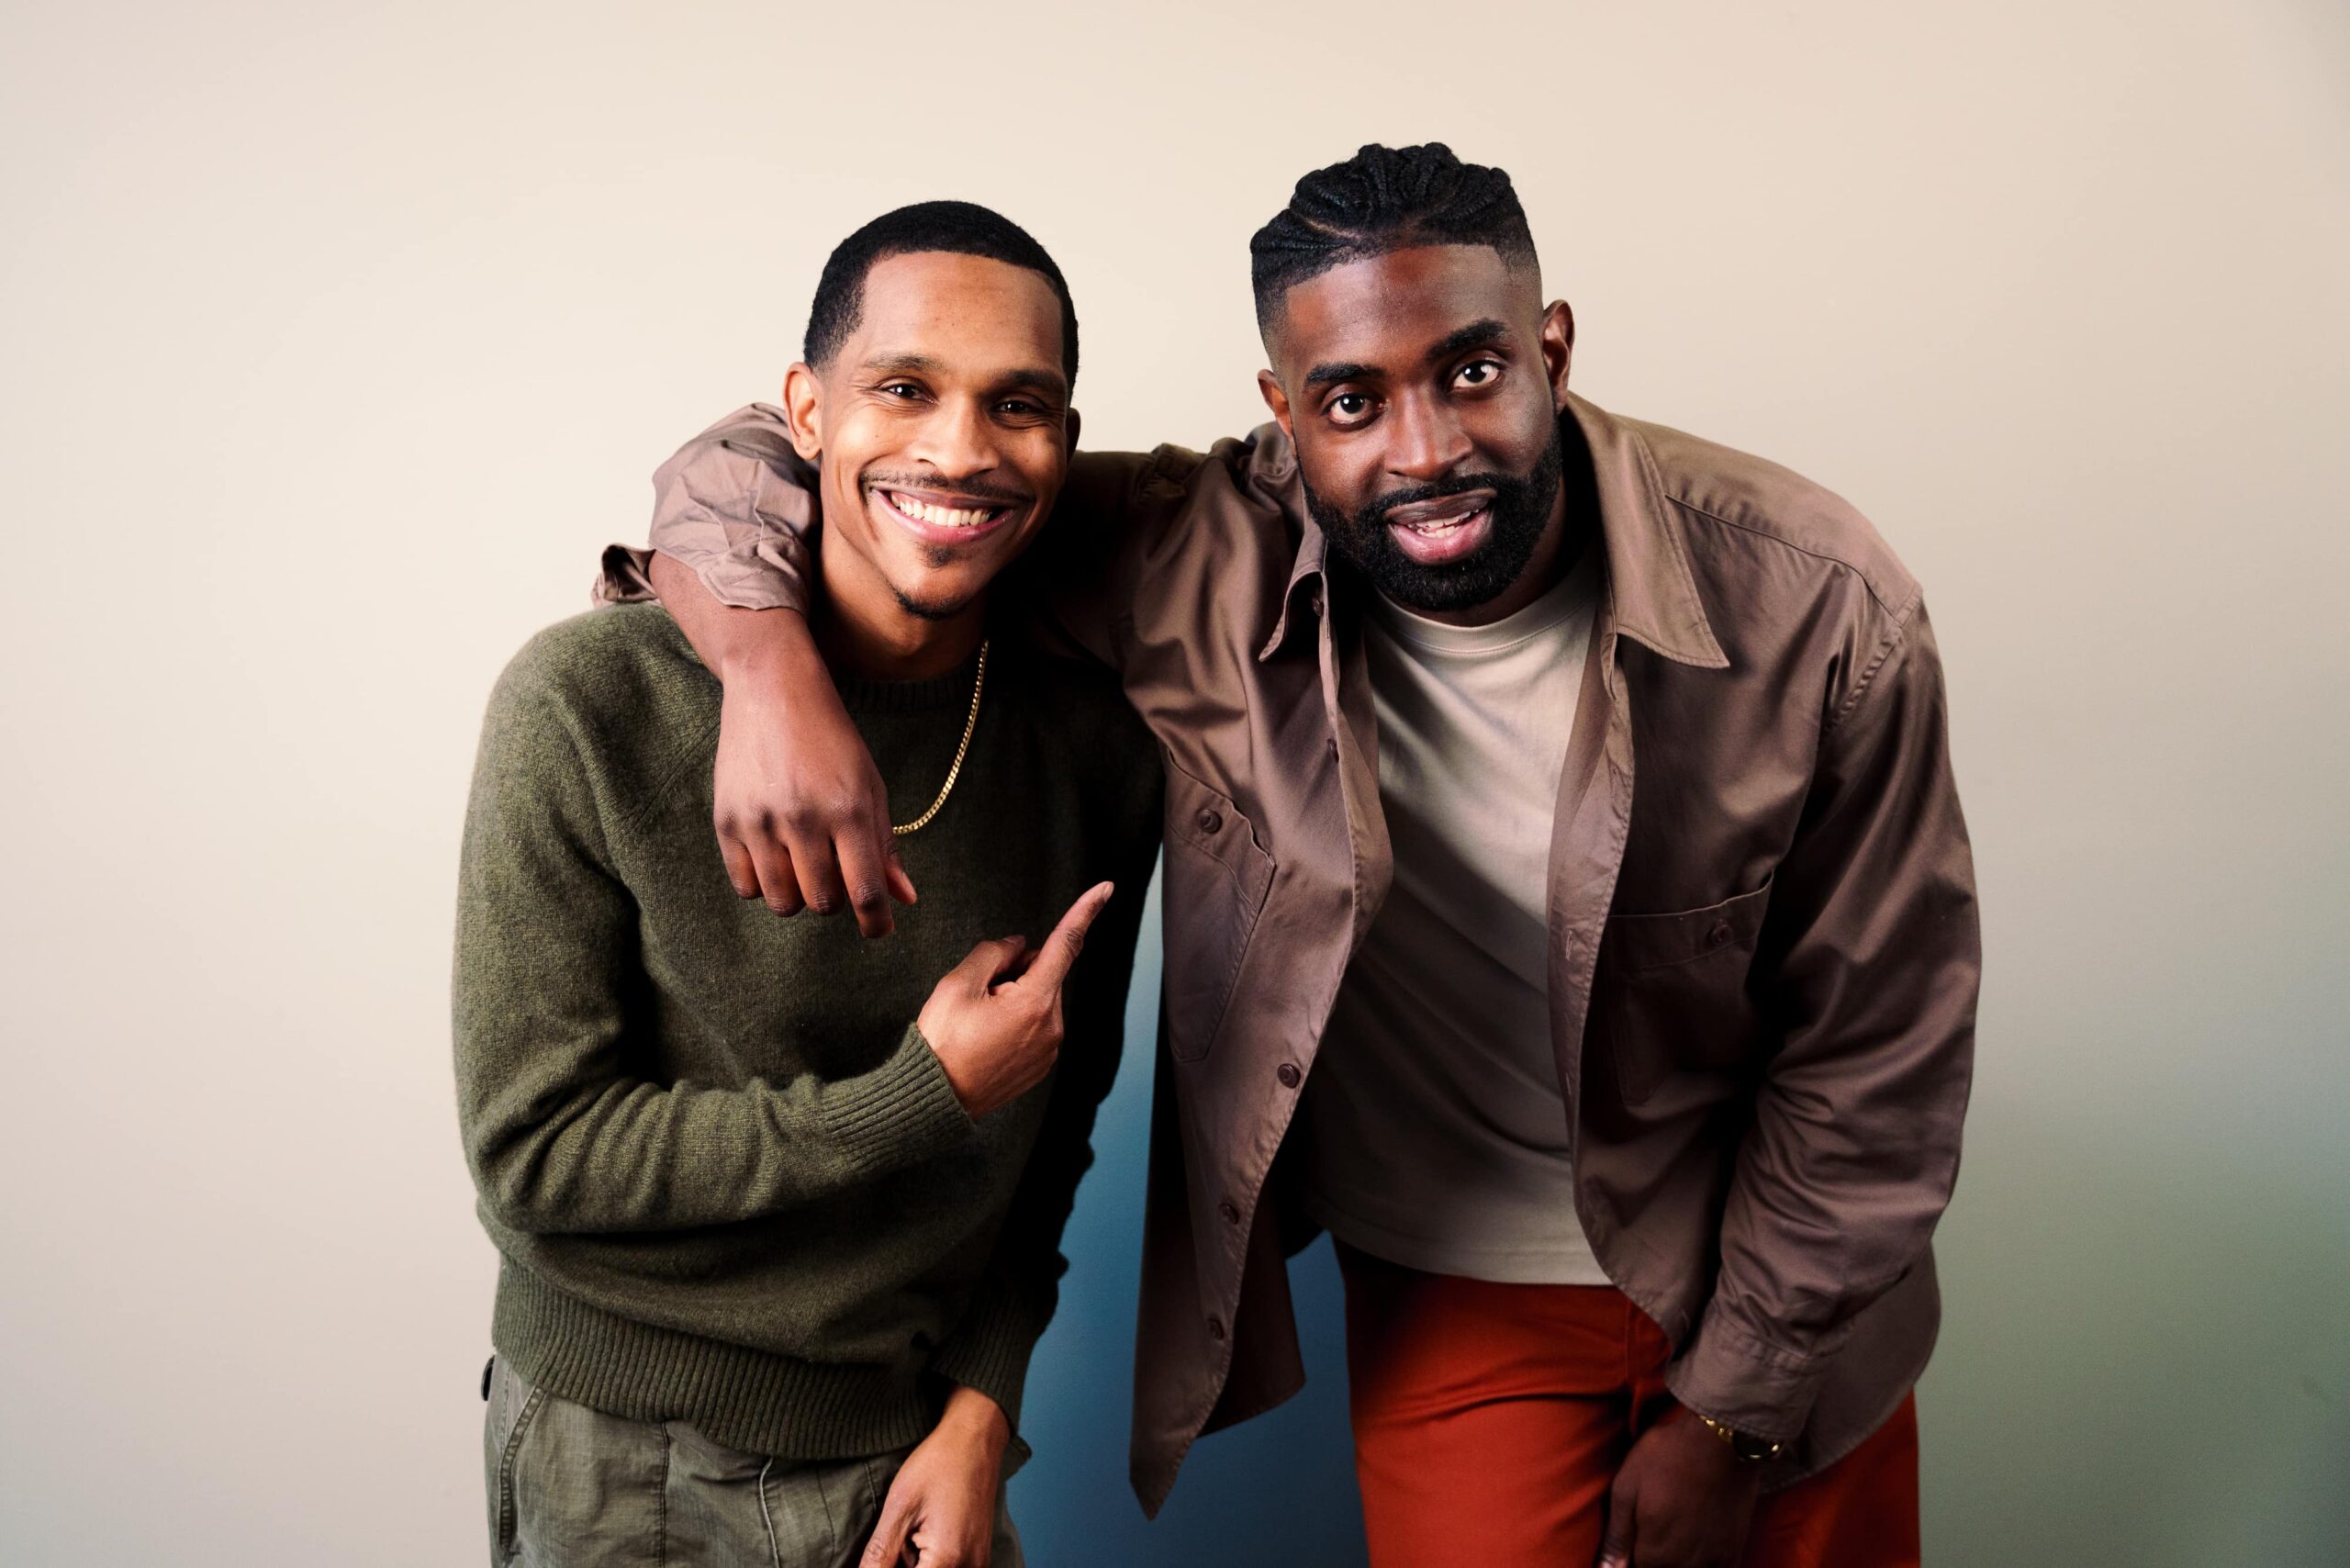 Special guest Roy Scott CEO  of Healthy Hip Hop joins Marcus and Ace for a conversation on faith and fatherhood, change and culture, Michael B. Jordan, and music.